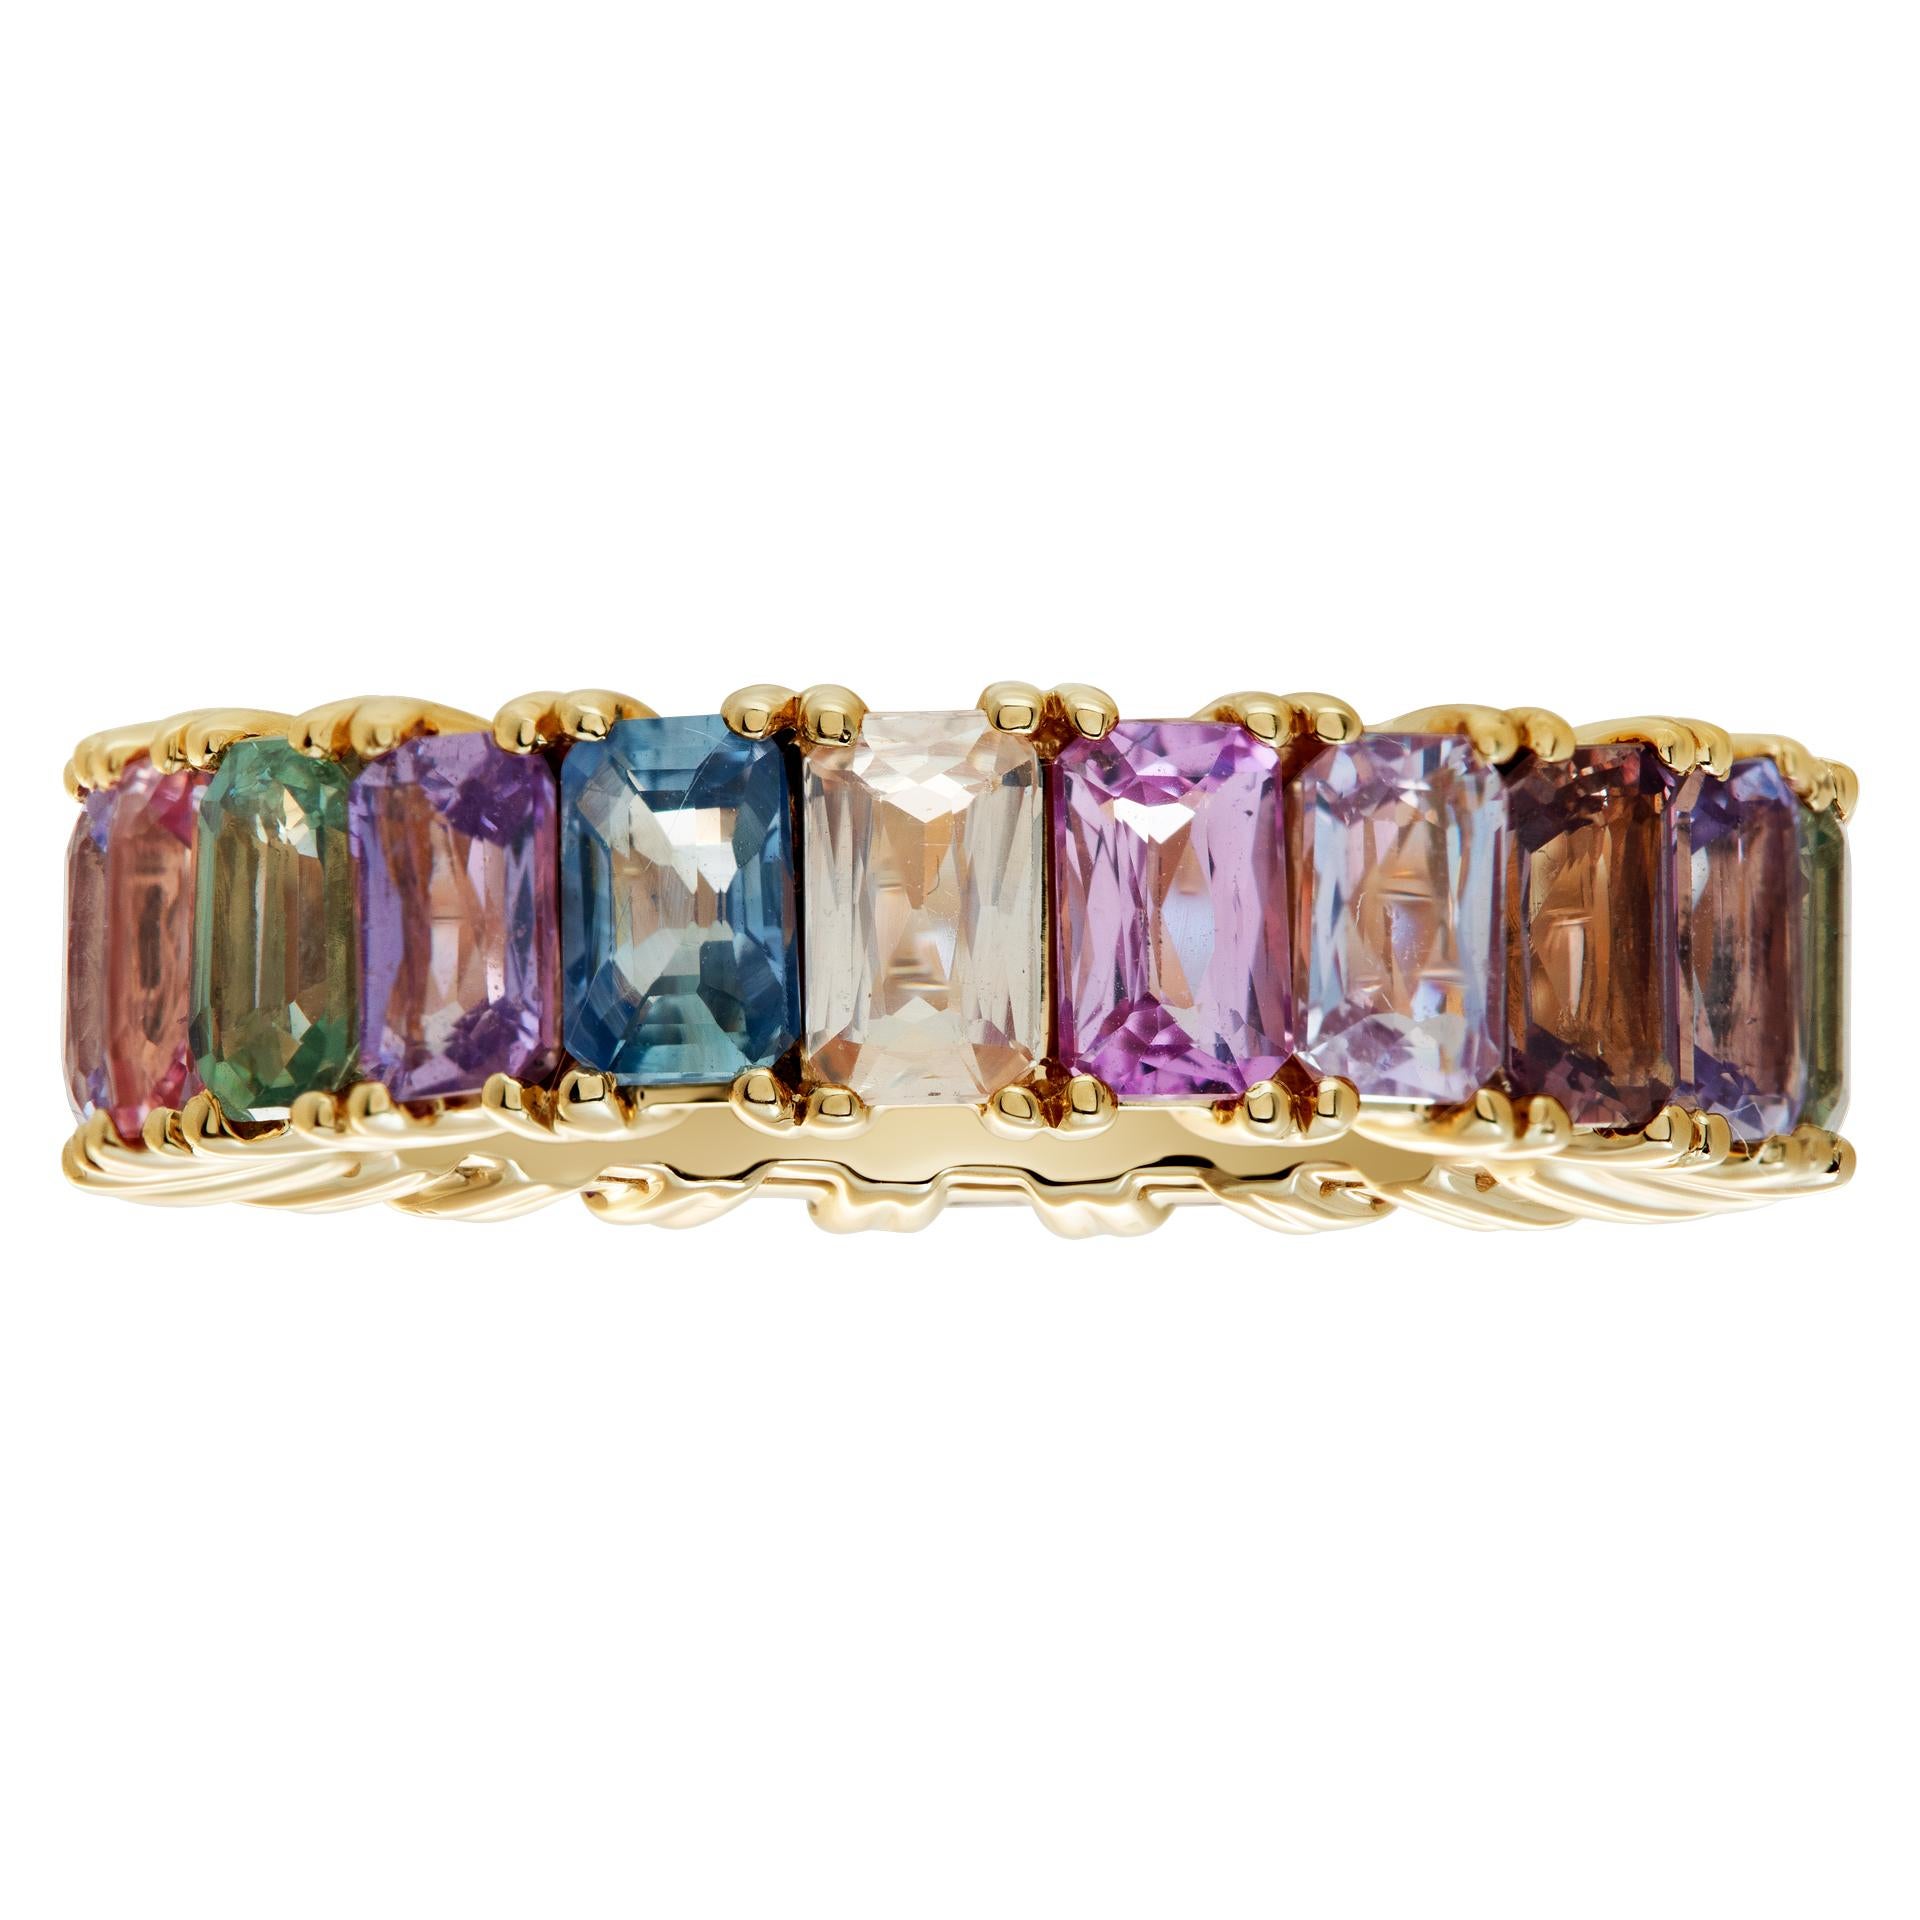 Colorful sapphire eternity band in 14k yellow gold with 7.80 carats in green, pink, blue, orange, yellow and purple colored emerald-cut sapphires. Size 7, width 6mm.This Sapphire ring is currently size 7 and some items can be sized up or down,